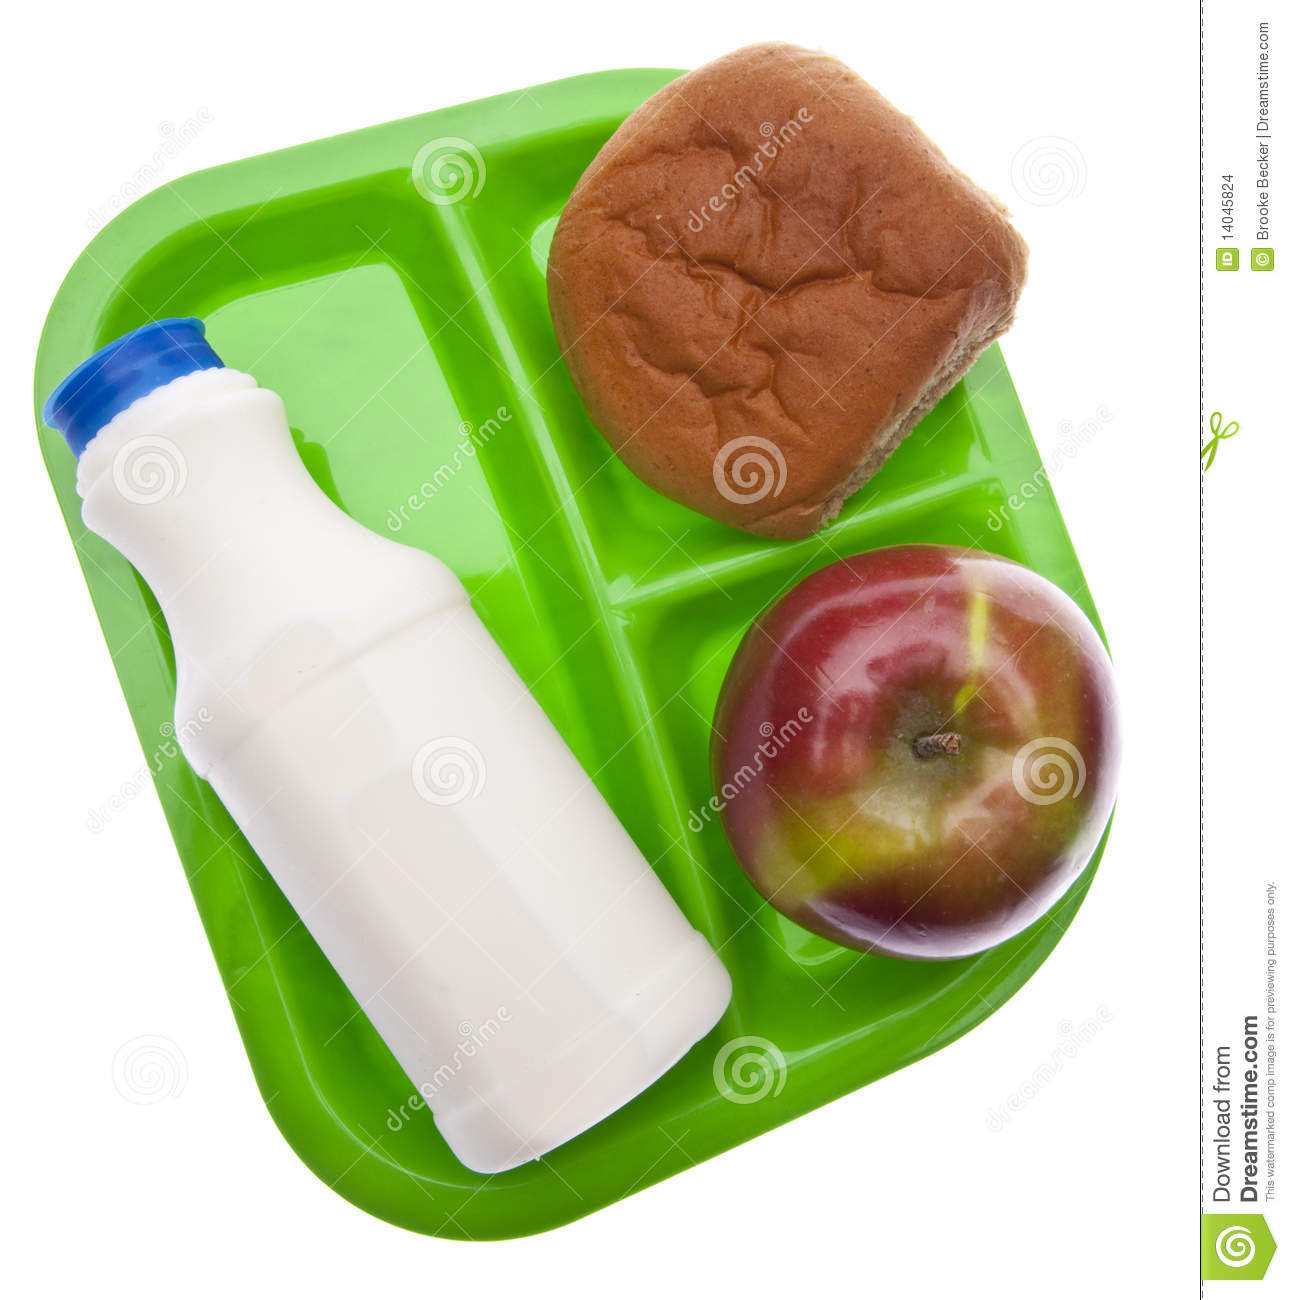 Healthy School Lunch Themed Image  Tray With Balanced Meal  Isolated    